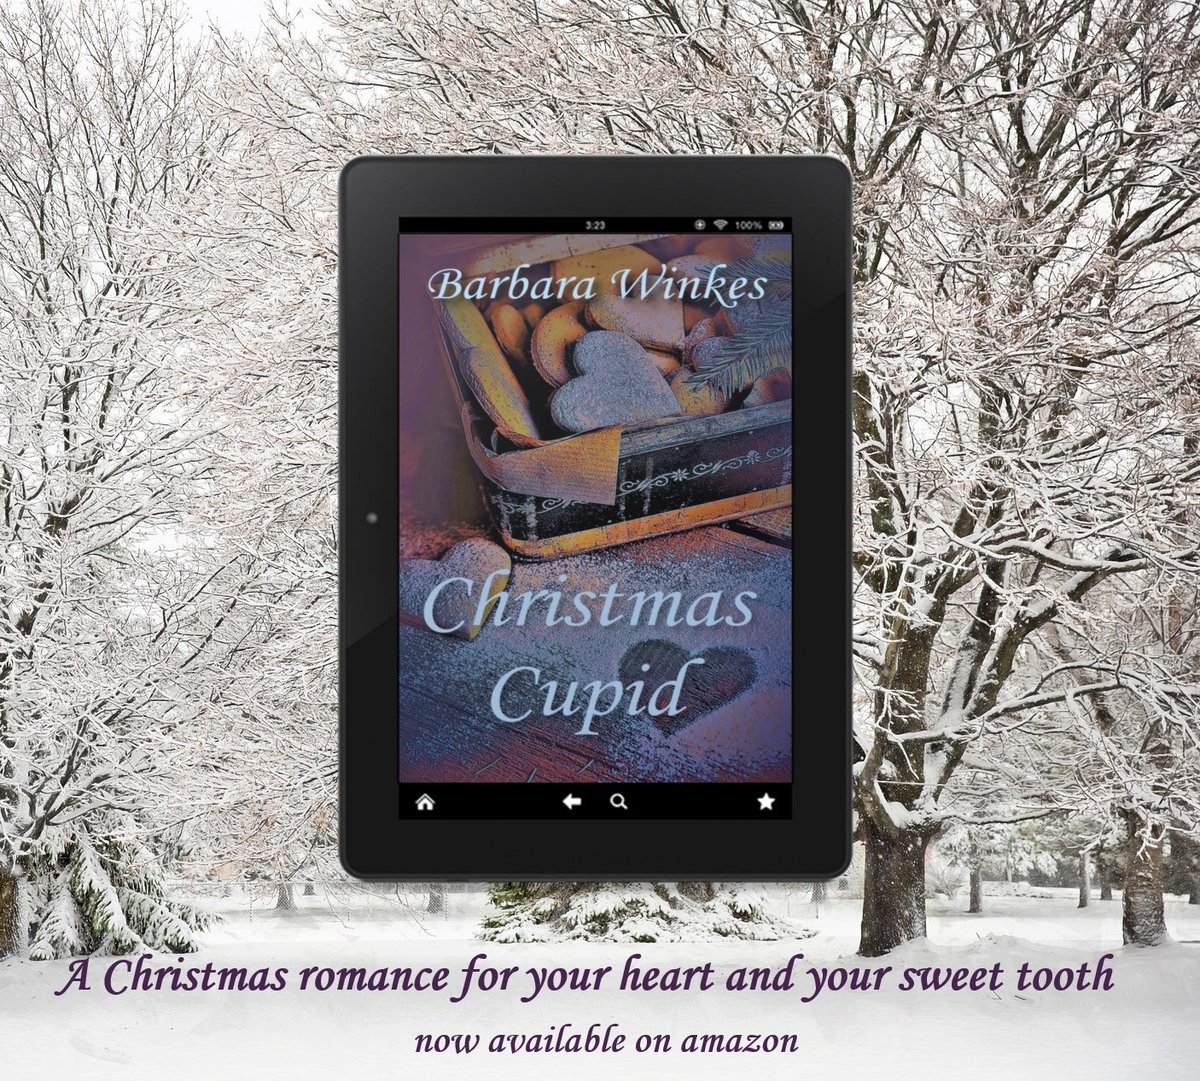 It's here! Discover the magic of a place called Pinedale... 💖🎄⭐️🌈📚#lesfic #wlwromance #holidayromance #iReadIndies #KindleUnlimited smarturl.it/ChristmasCupid…